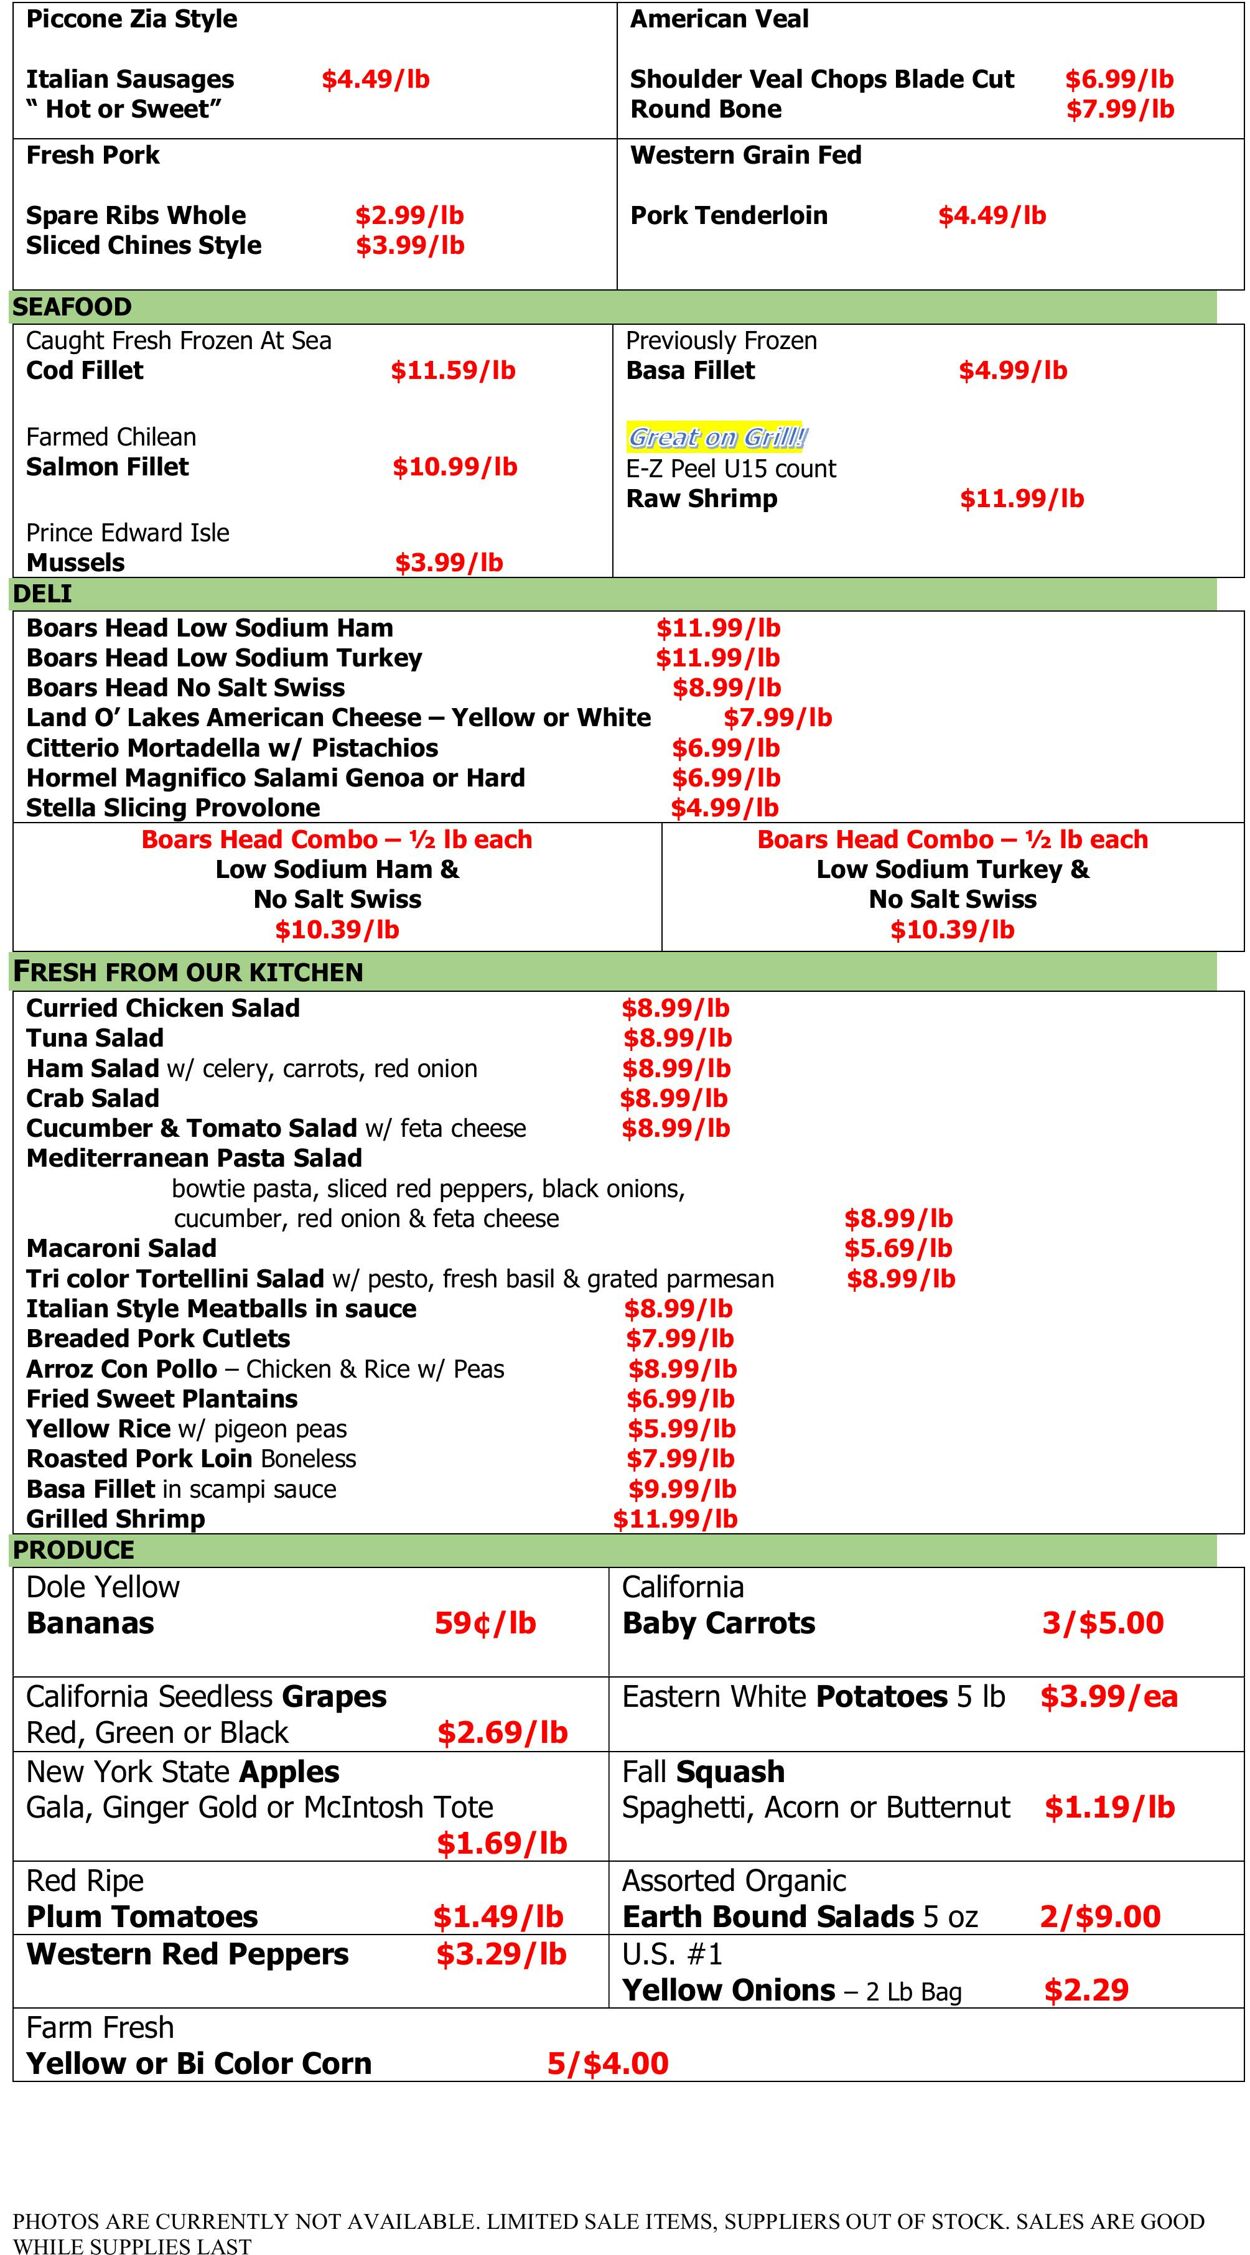 Weekly ad Country Markets of Westchester 09/23/2022 - 09/29/2022